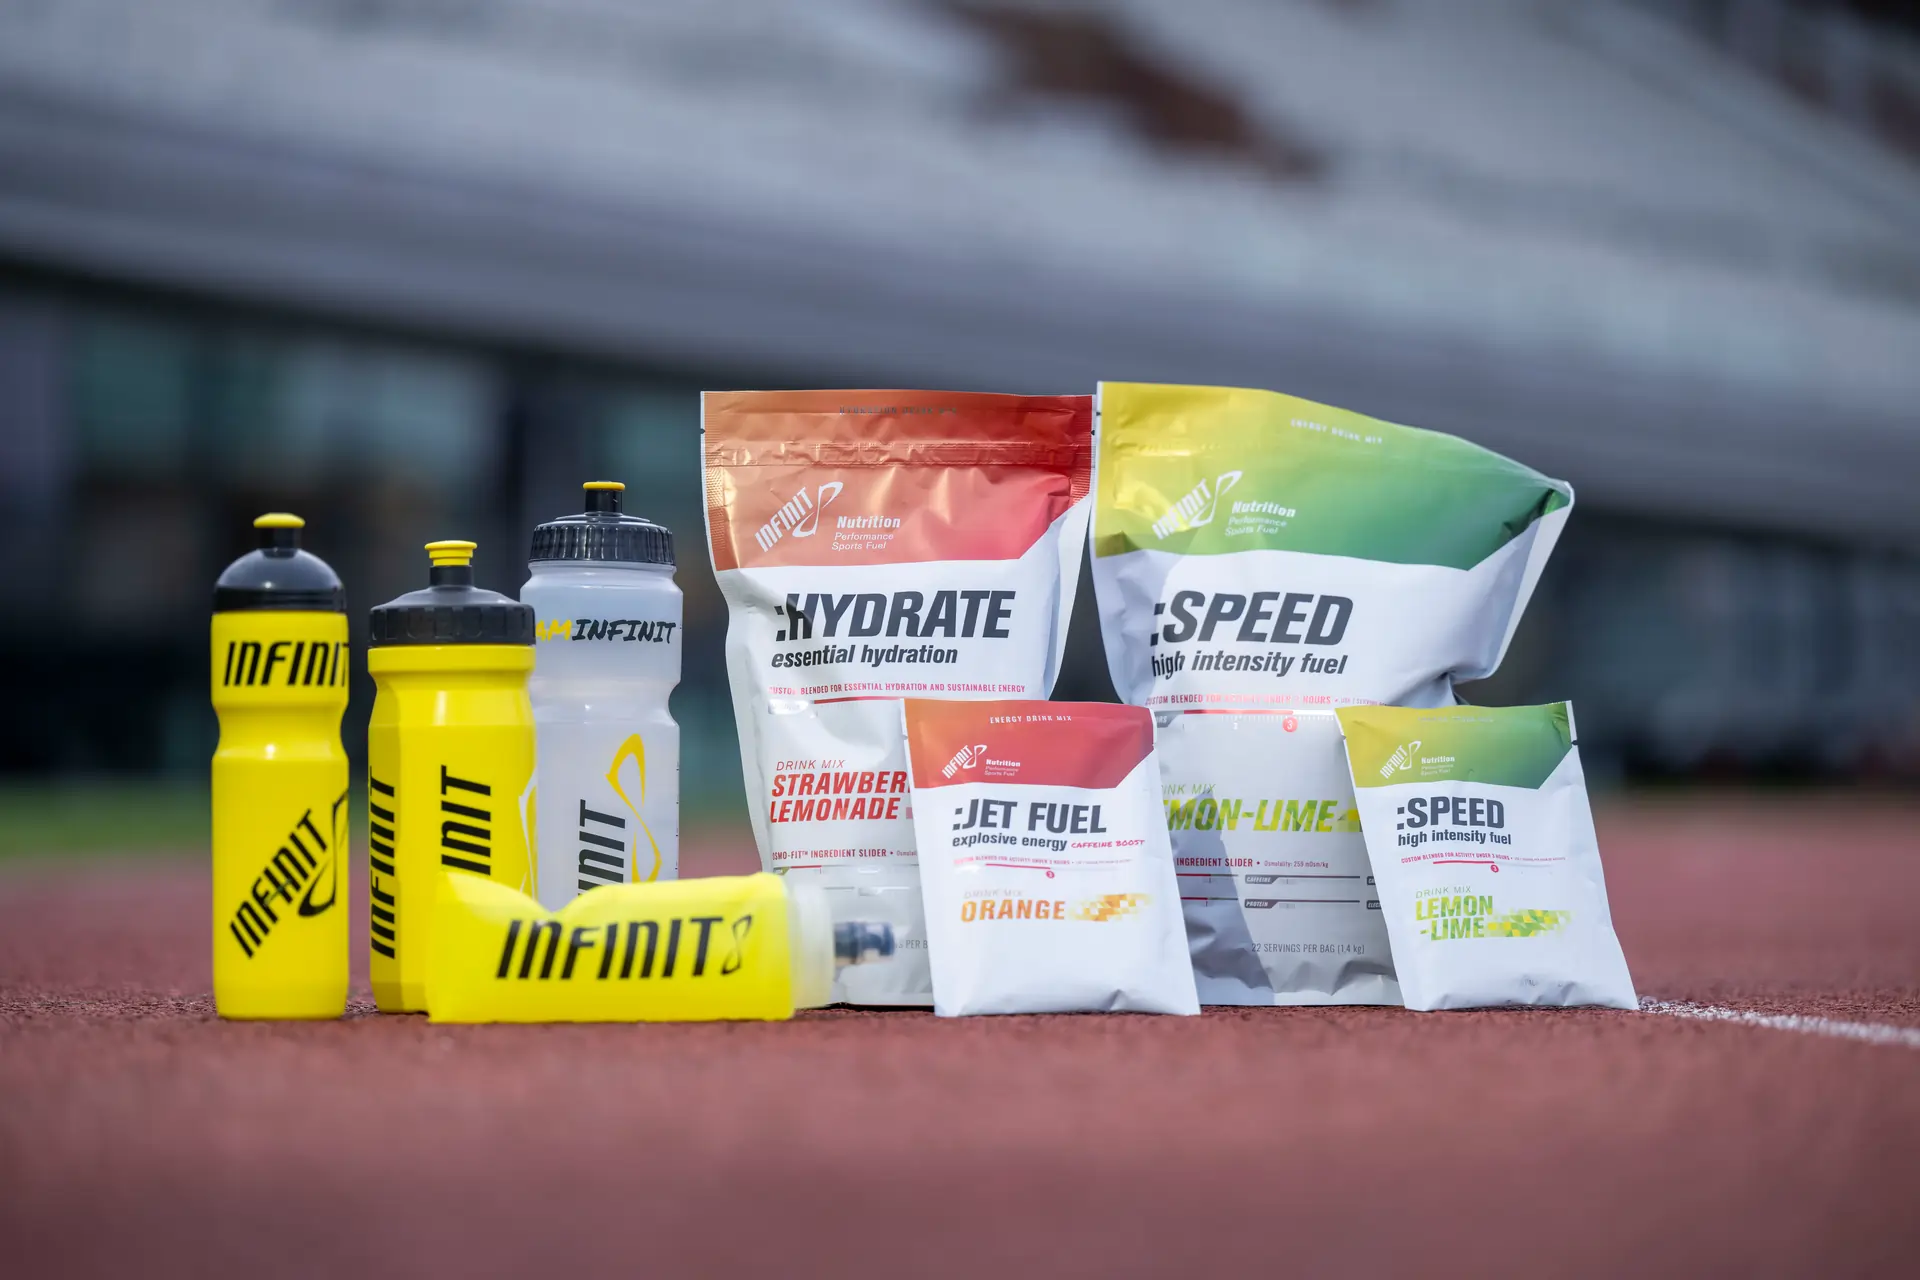 Fueling Performance: INFINIT Nutrition 